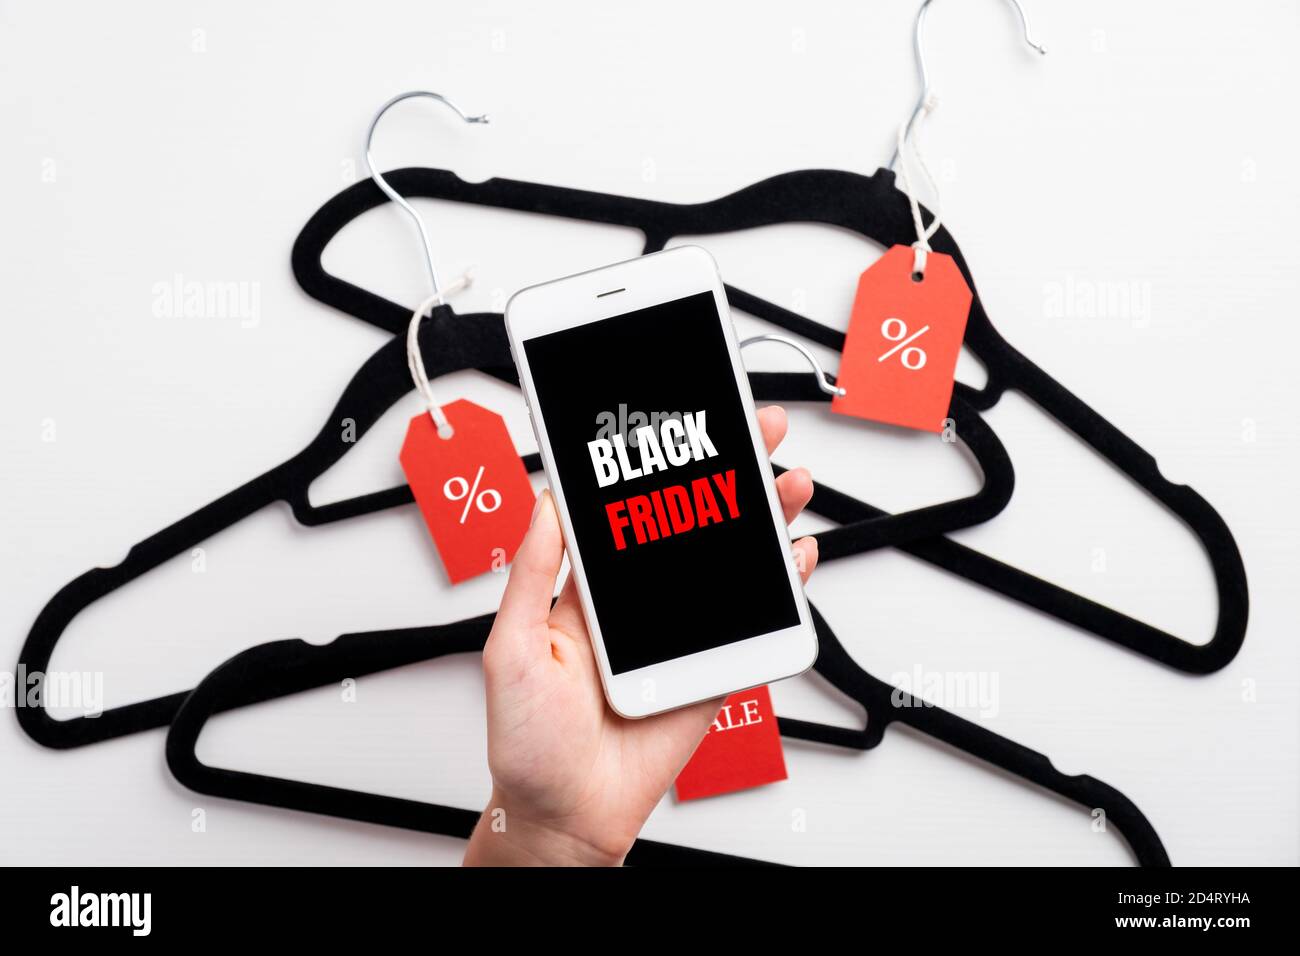 Black Friday alert on mobile smartphone in female hand. Coat hangers with red labels on background. Stock Photo